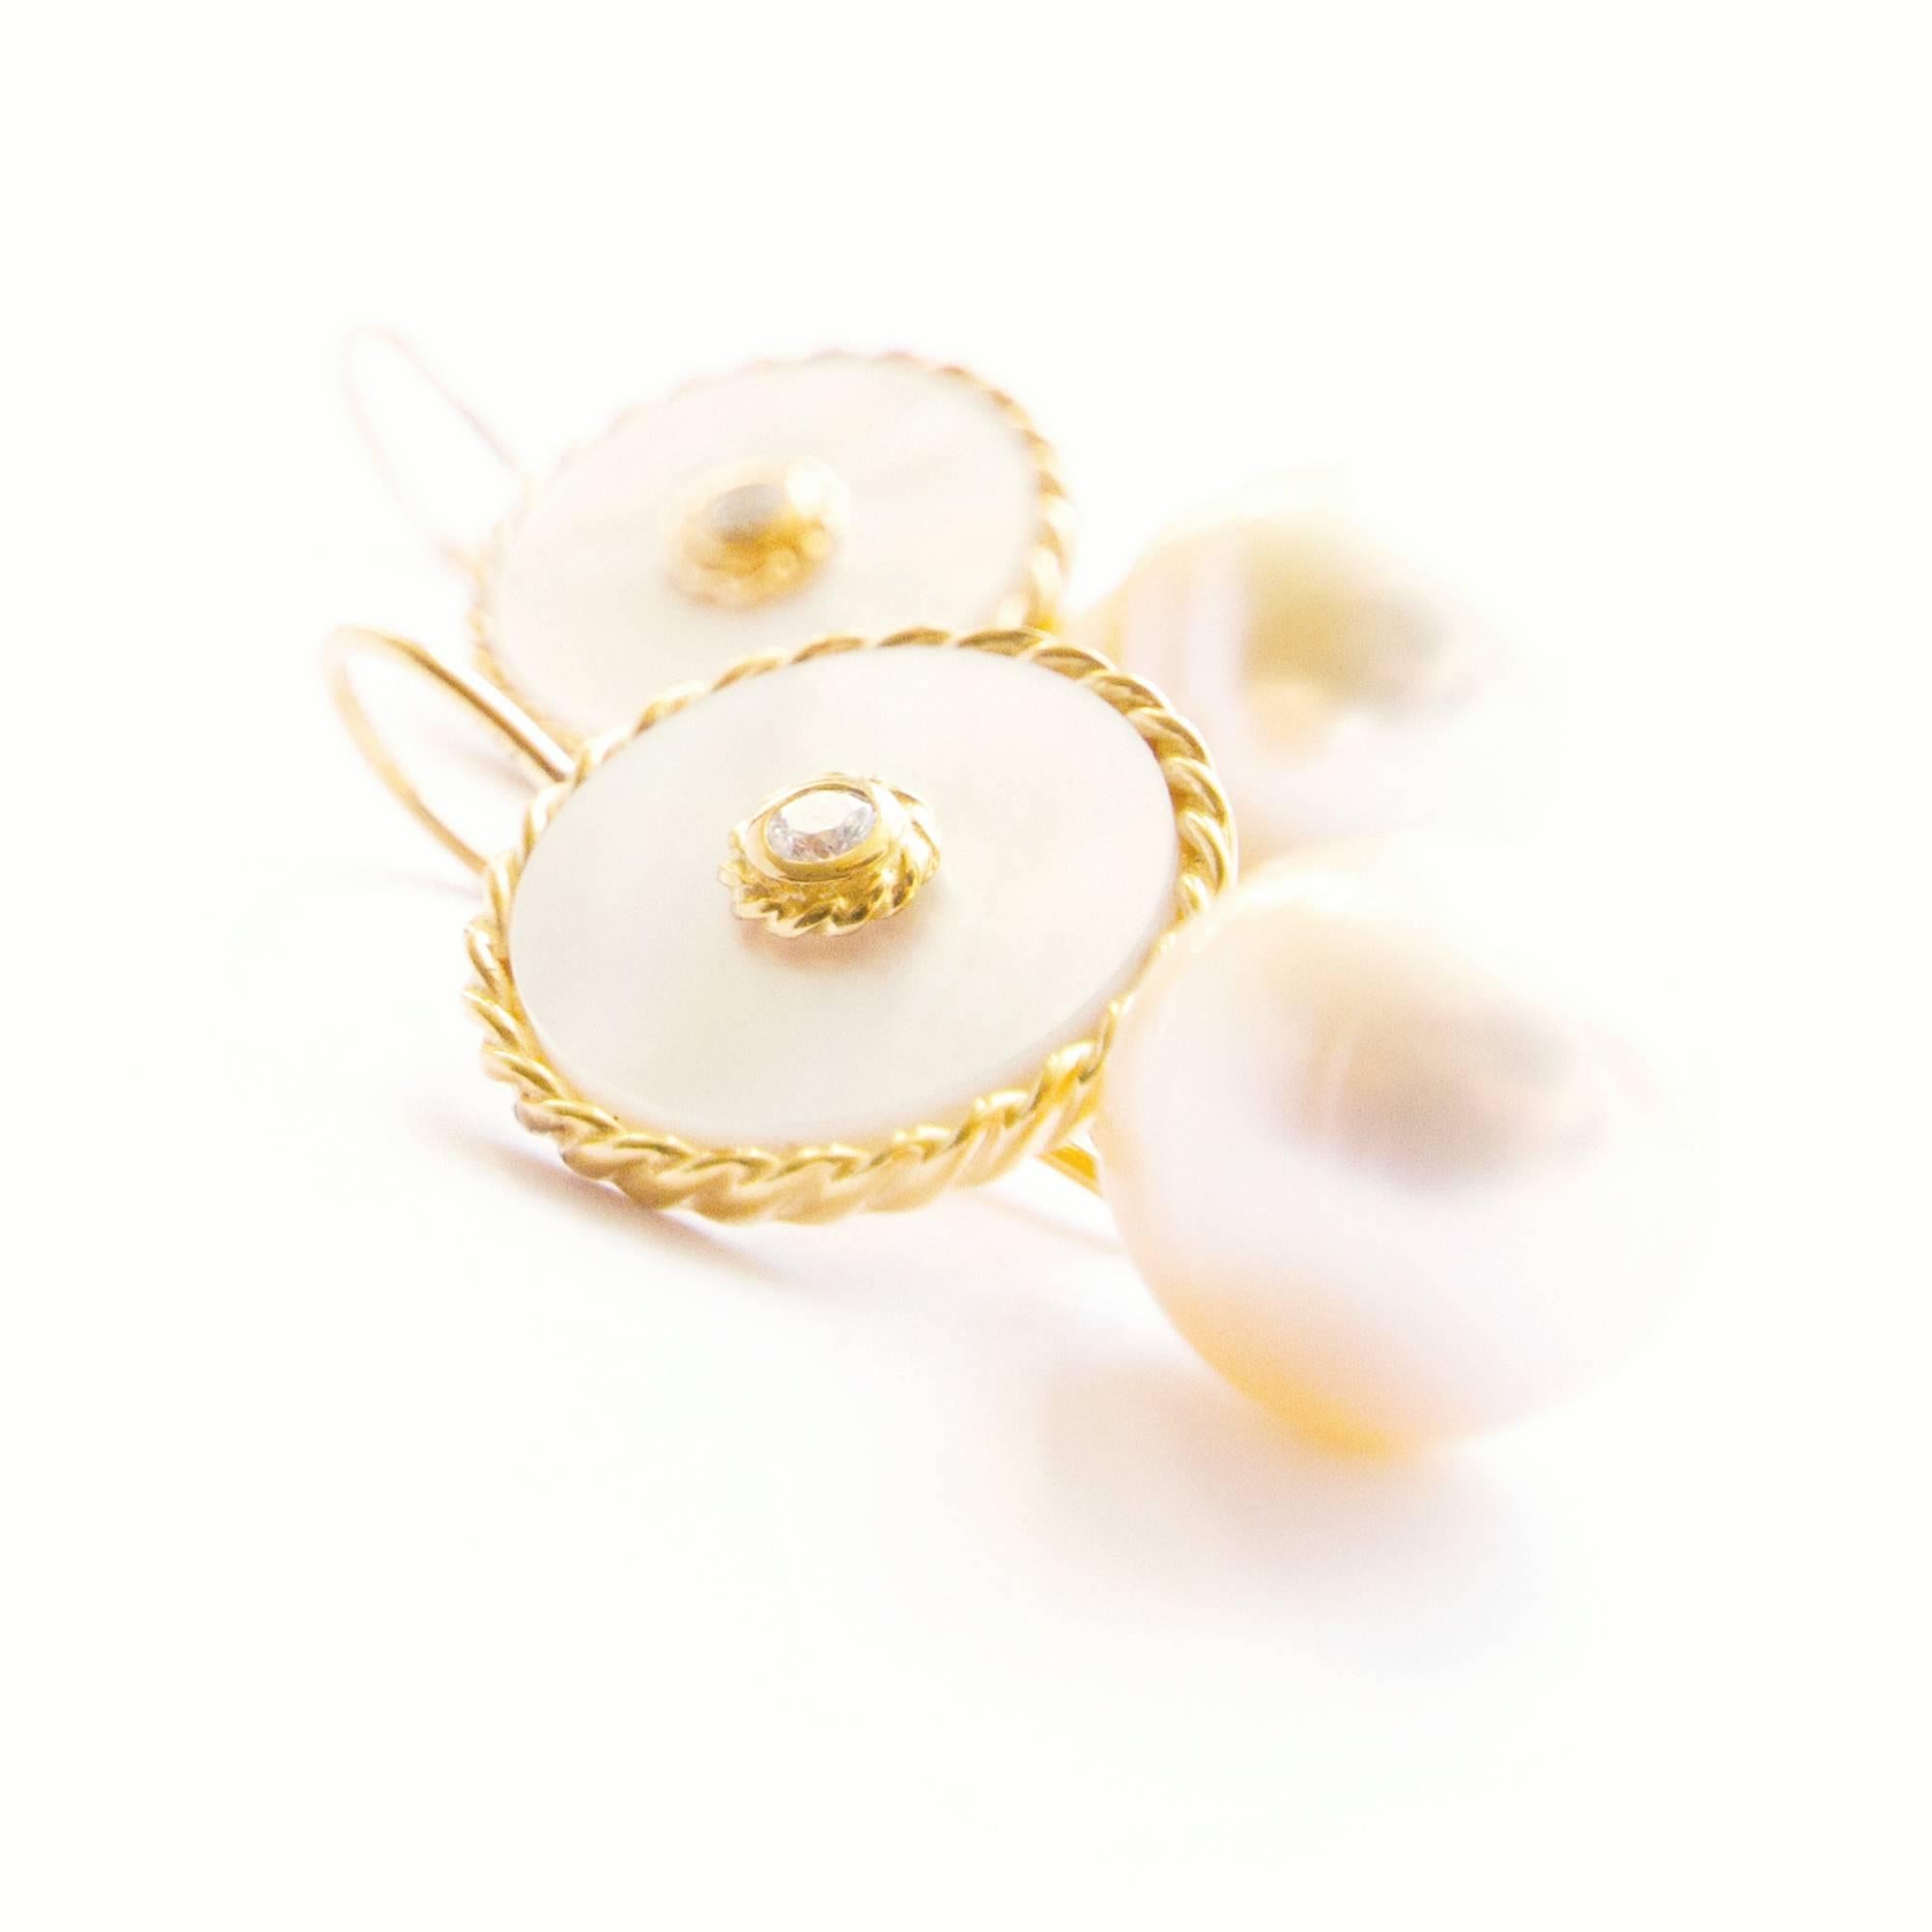 Interchangeable Earrings. 18K gold vermeil earrings with 18K gold hook. 0,07 crt diamonds (total 0,14 crt) and South Sea pearls. These white mother-of-pearl beauties provide a stylish, understated accent to almost every outfit or occasion.  A